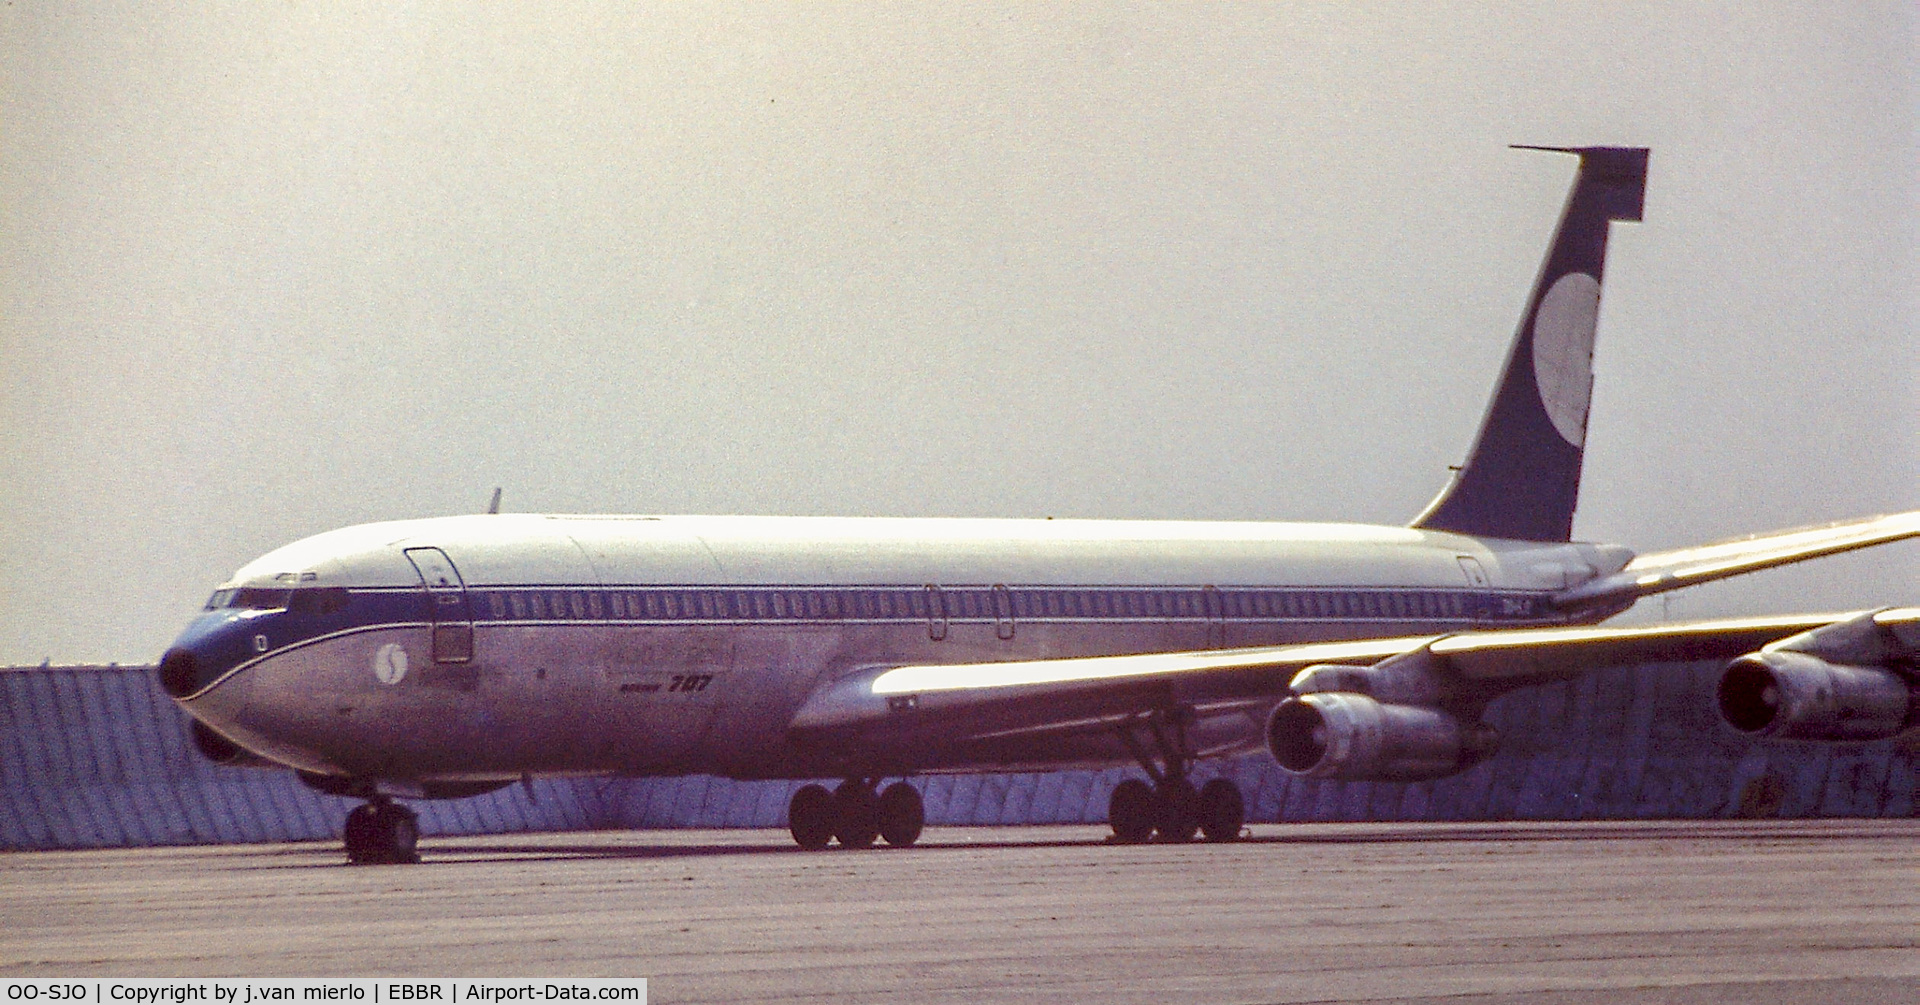 OO-SJO, 1969 Boeing 707-329C C/N 20200, stored at Brussels awaiting reactivation